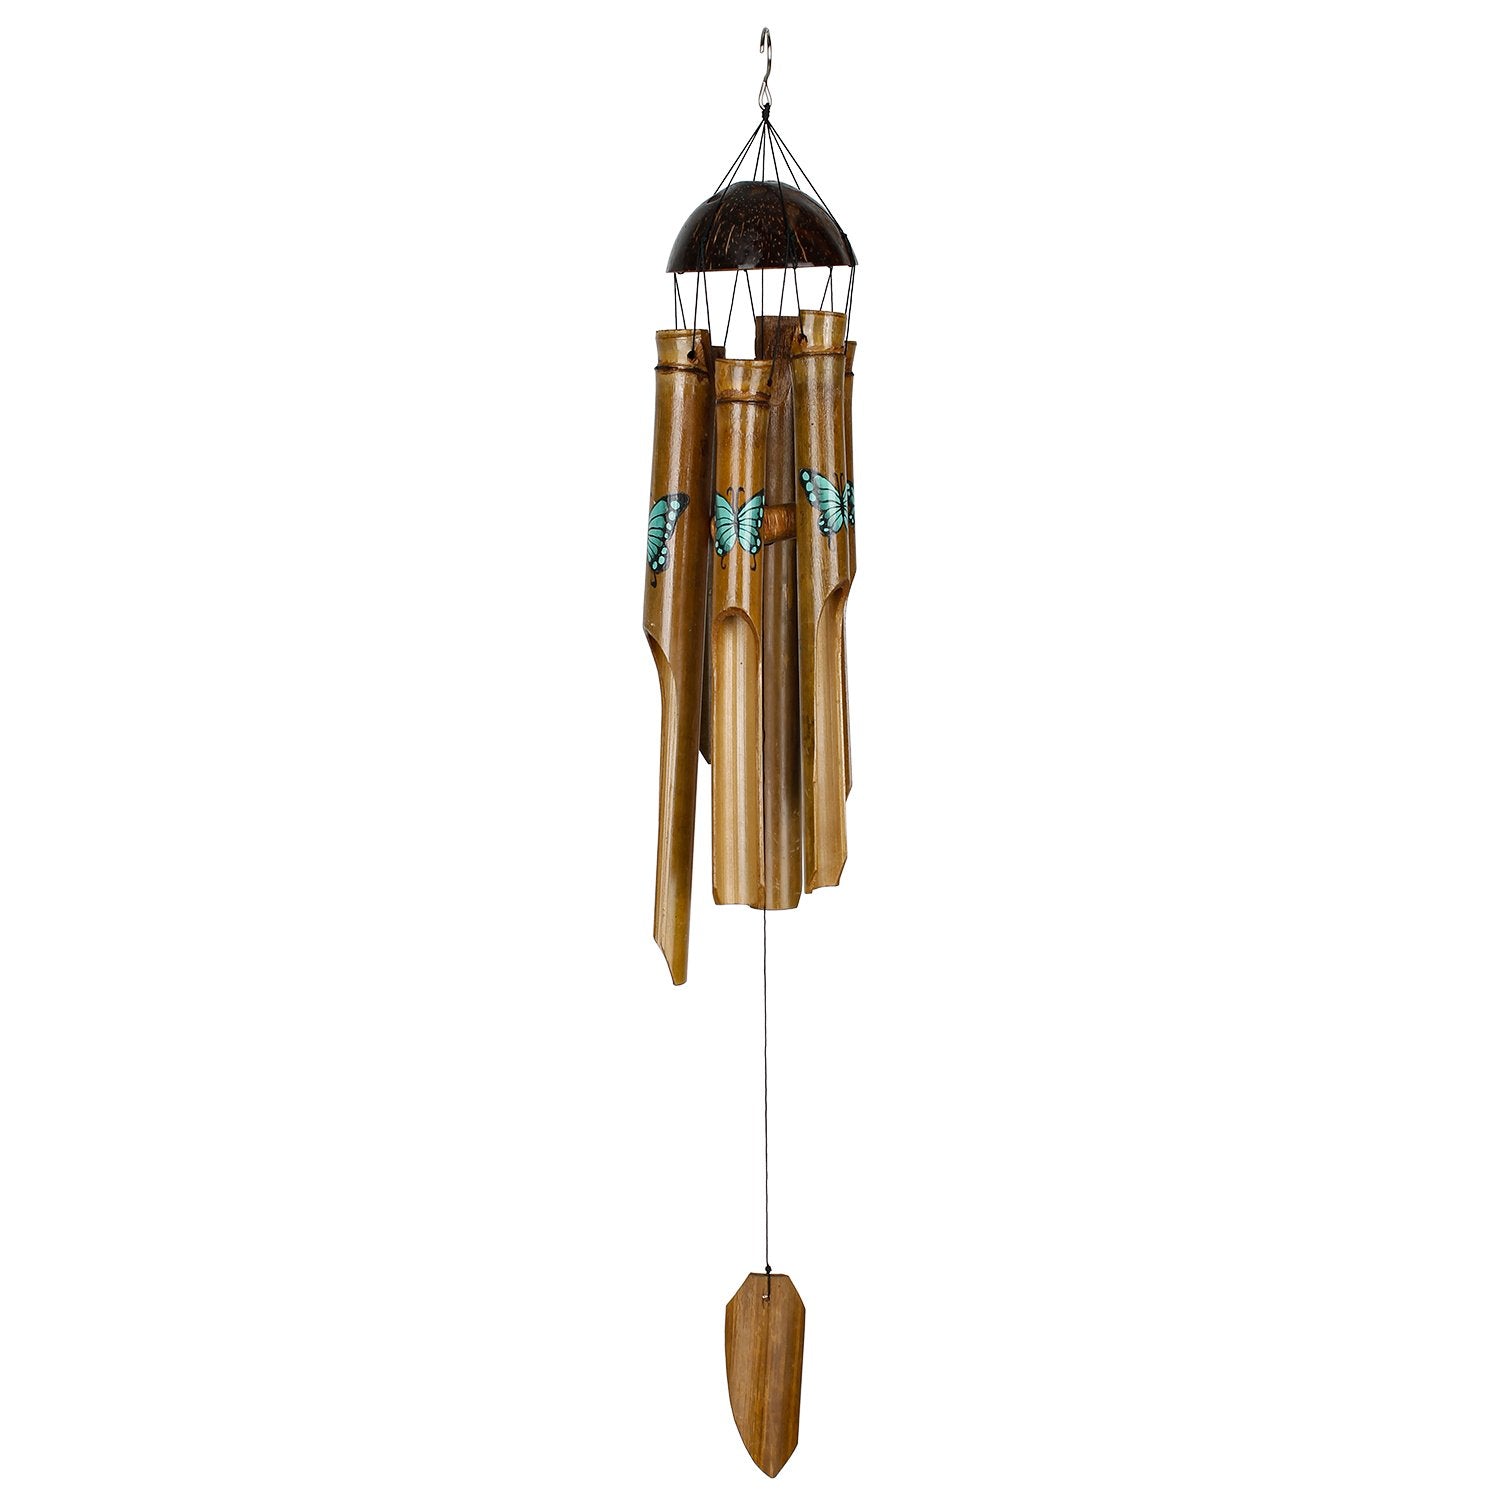 Butterfly Bamboo Chime - Teal full product image